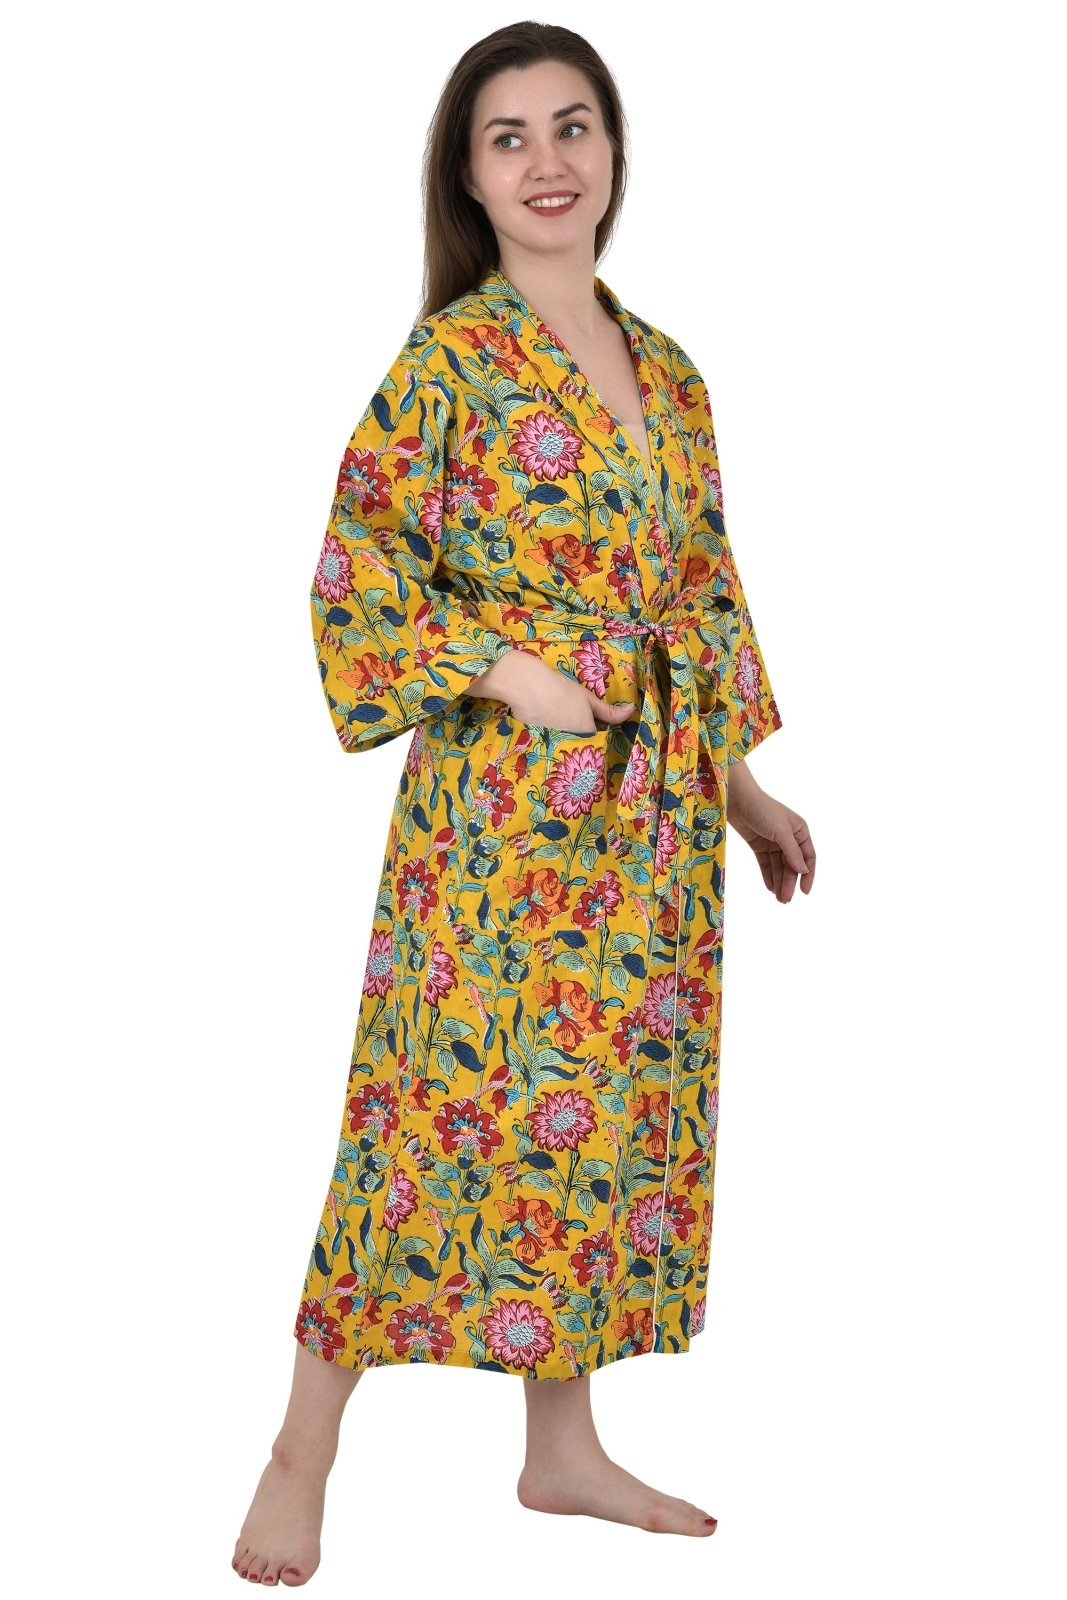 Pure Cotton Kimono Indian Handprinted Boho House Robe Summer Dress | Yellow Mustard Pink Floral Blossom Luxury Beach Holiday Yacht Cover Up - The Eastern Loom